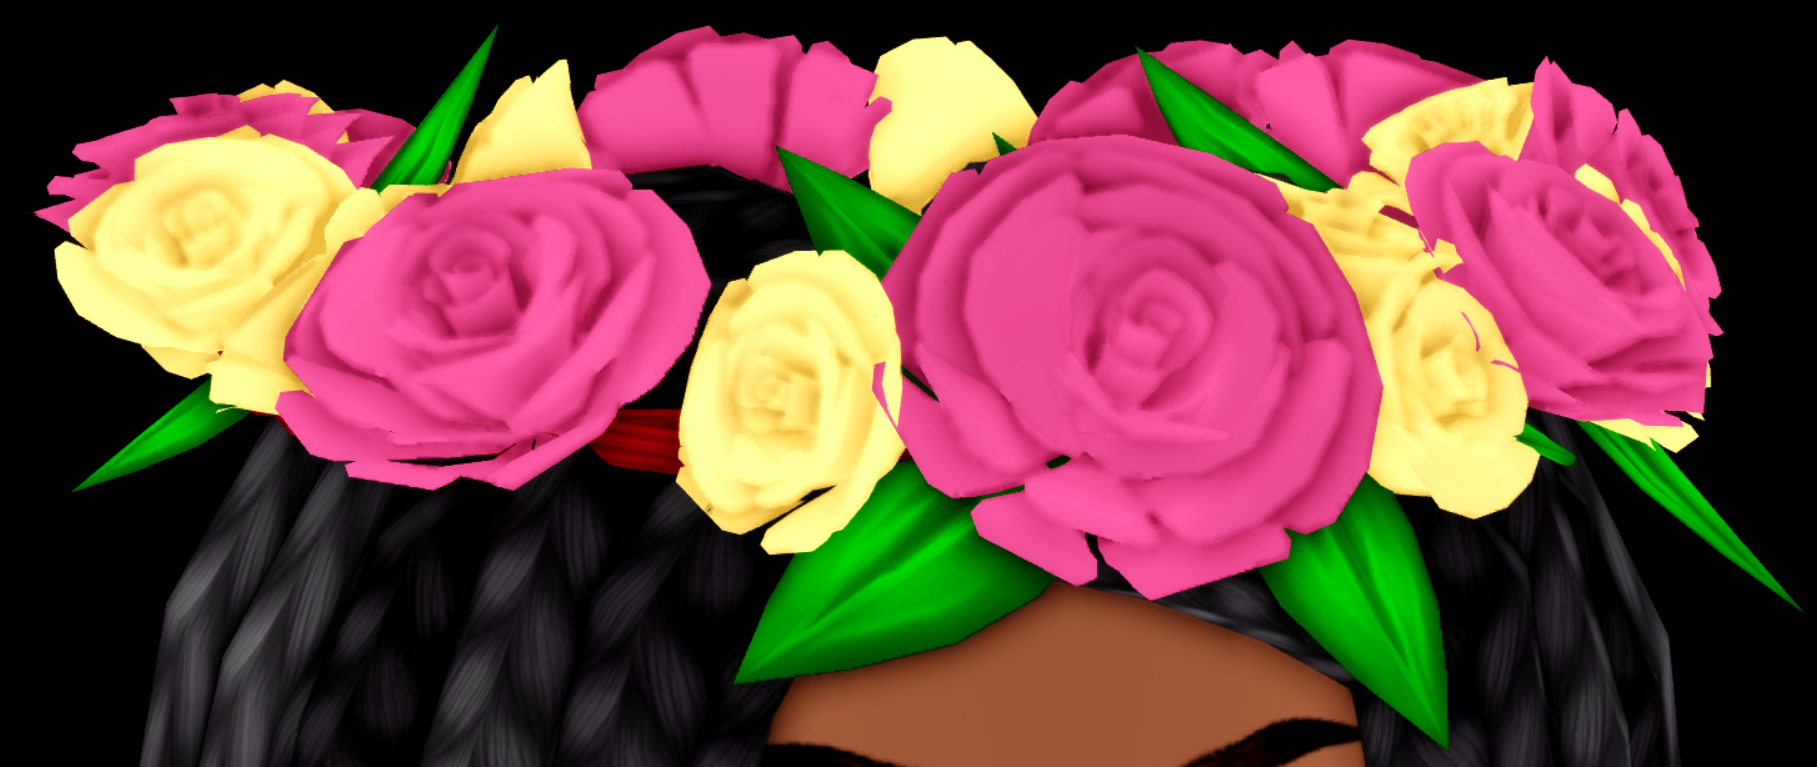 Spring Queen Crown Royale High Wiki Fandom - roblox royale high where is the flower crown